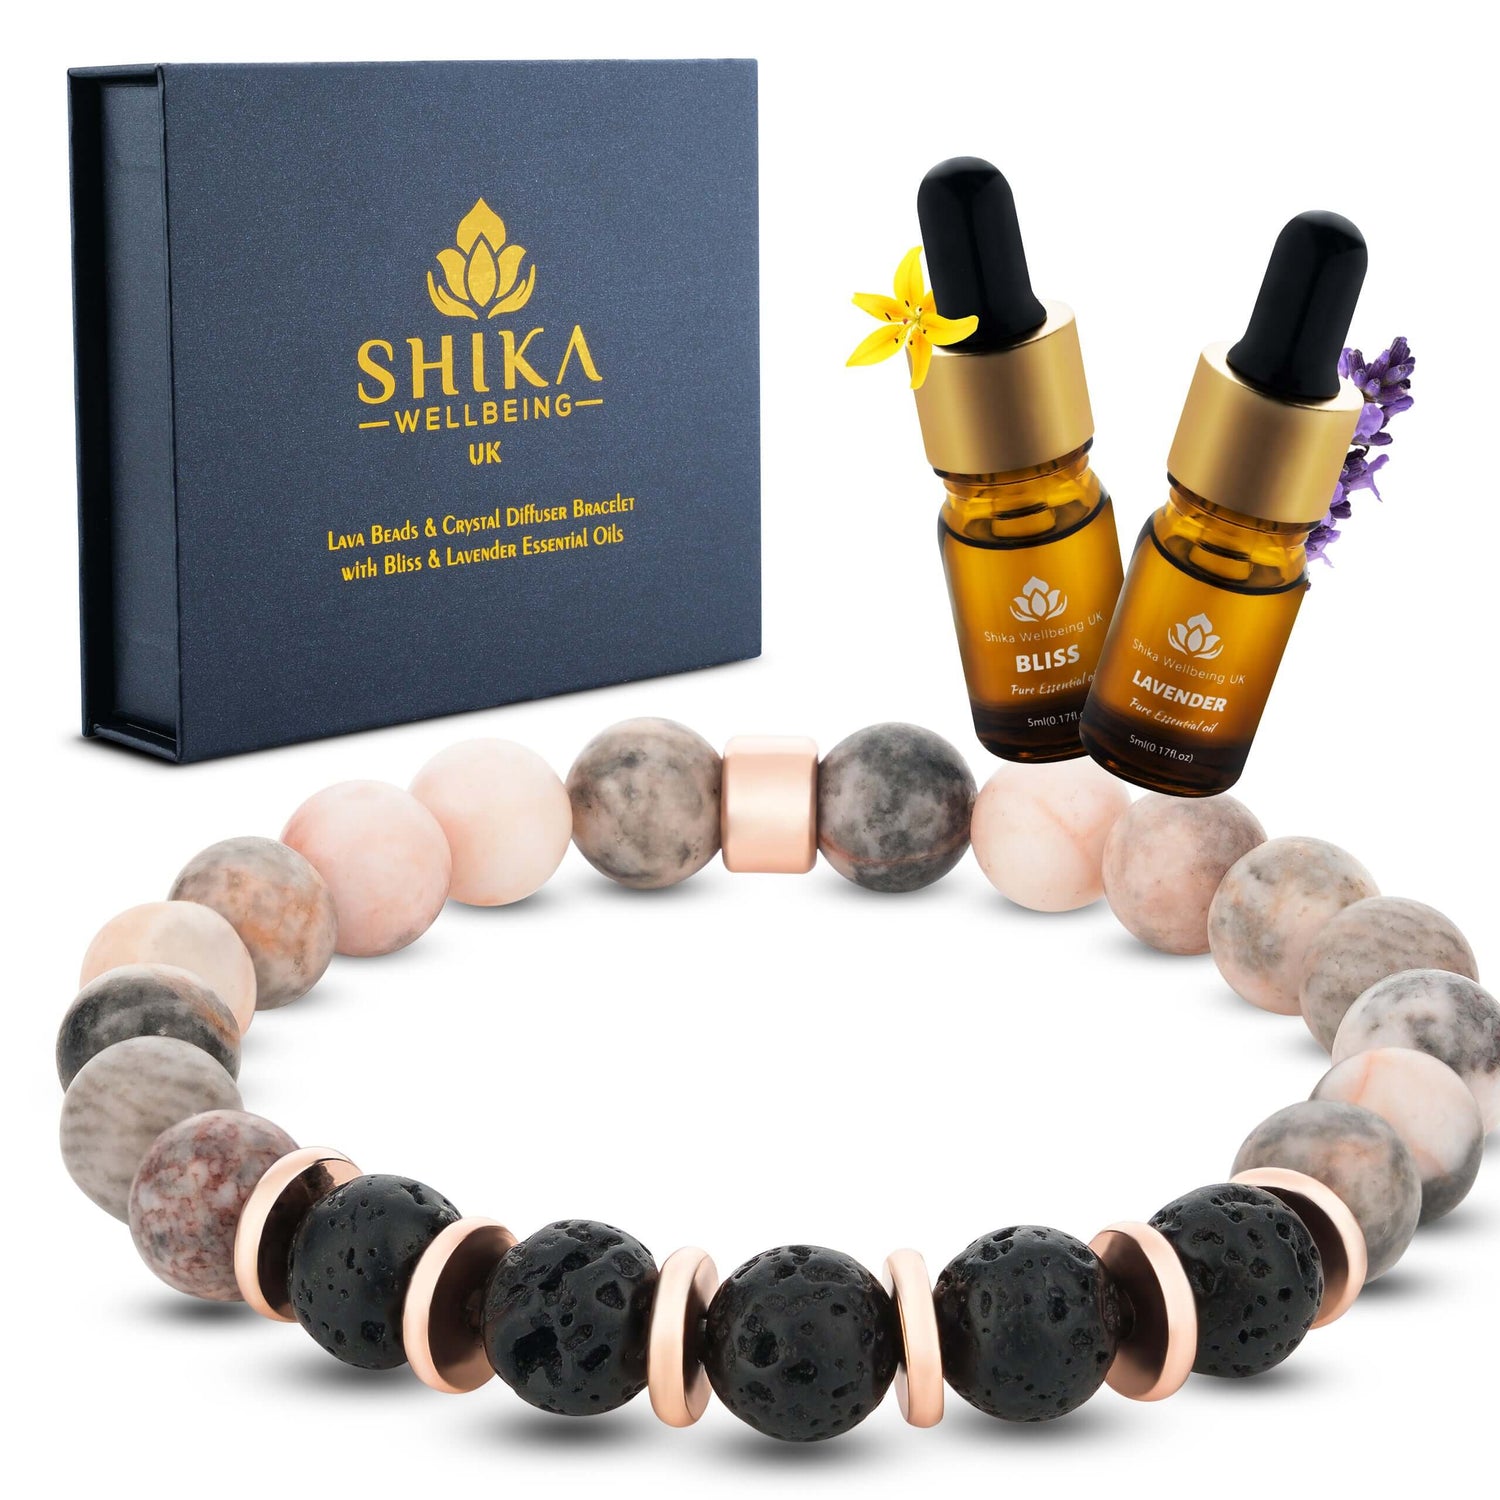 Whether you're facing a hectic day or seeking a moment of respite, this gift set provides the perfect solution. Simply apply a few drops of bliss and lavender oil to the lava stone beads and let the soothing scent envelop you in comfort.